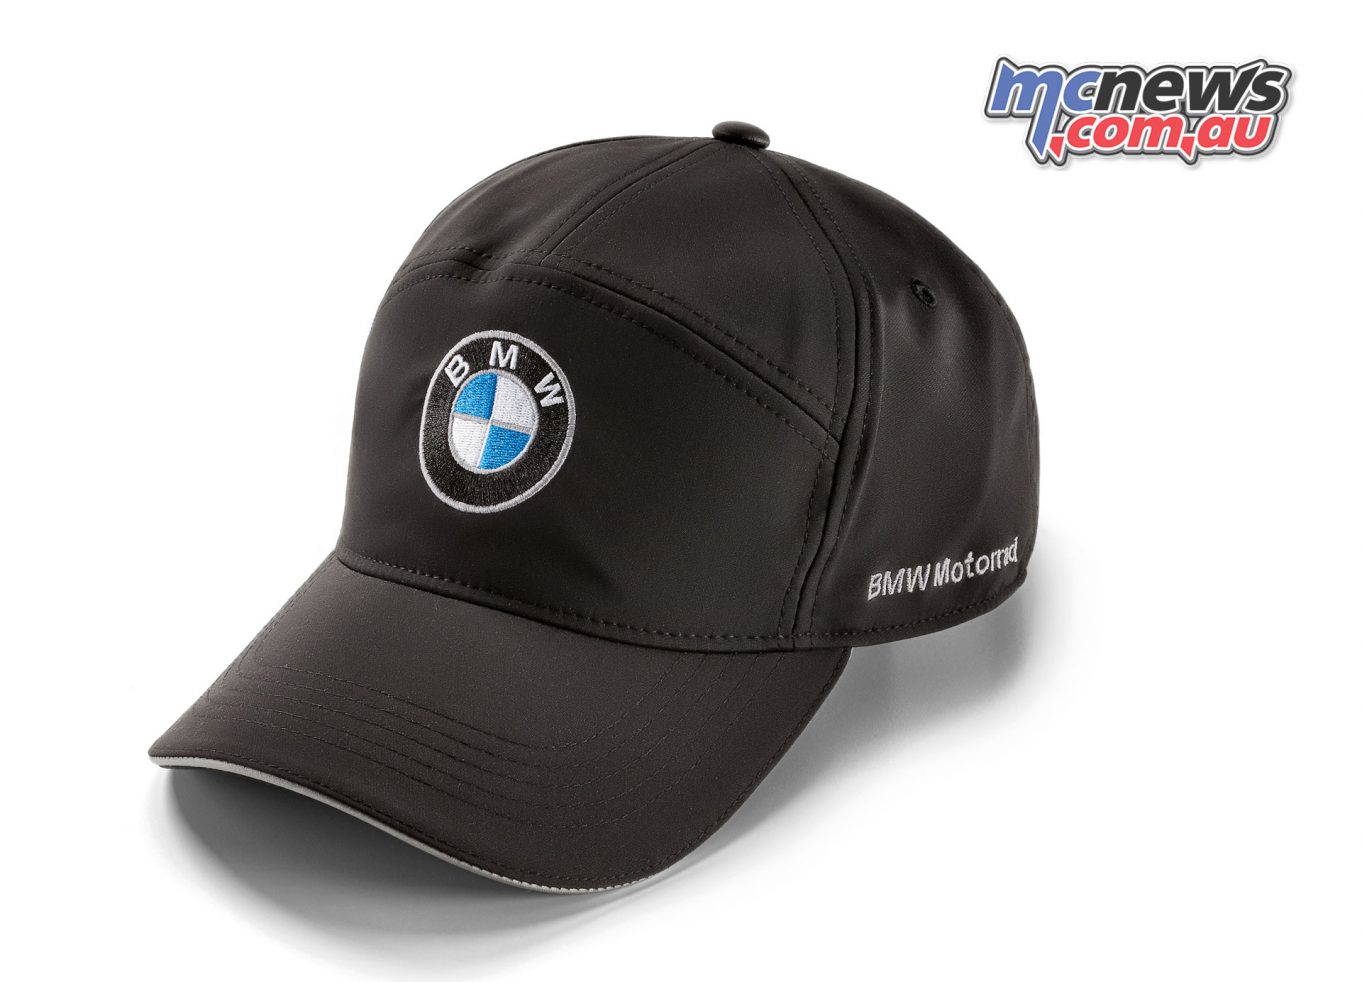 Father's Day gift ideas from BMW Motorrad | MCNews